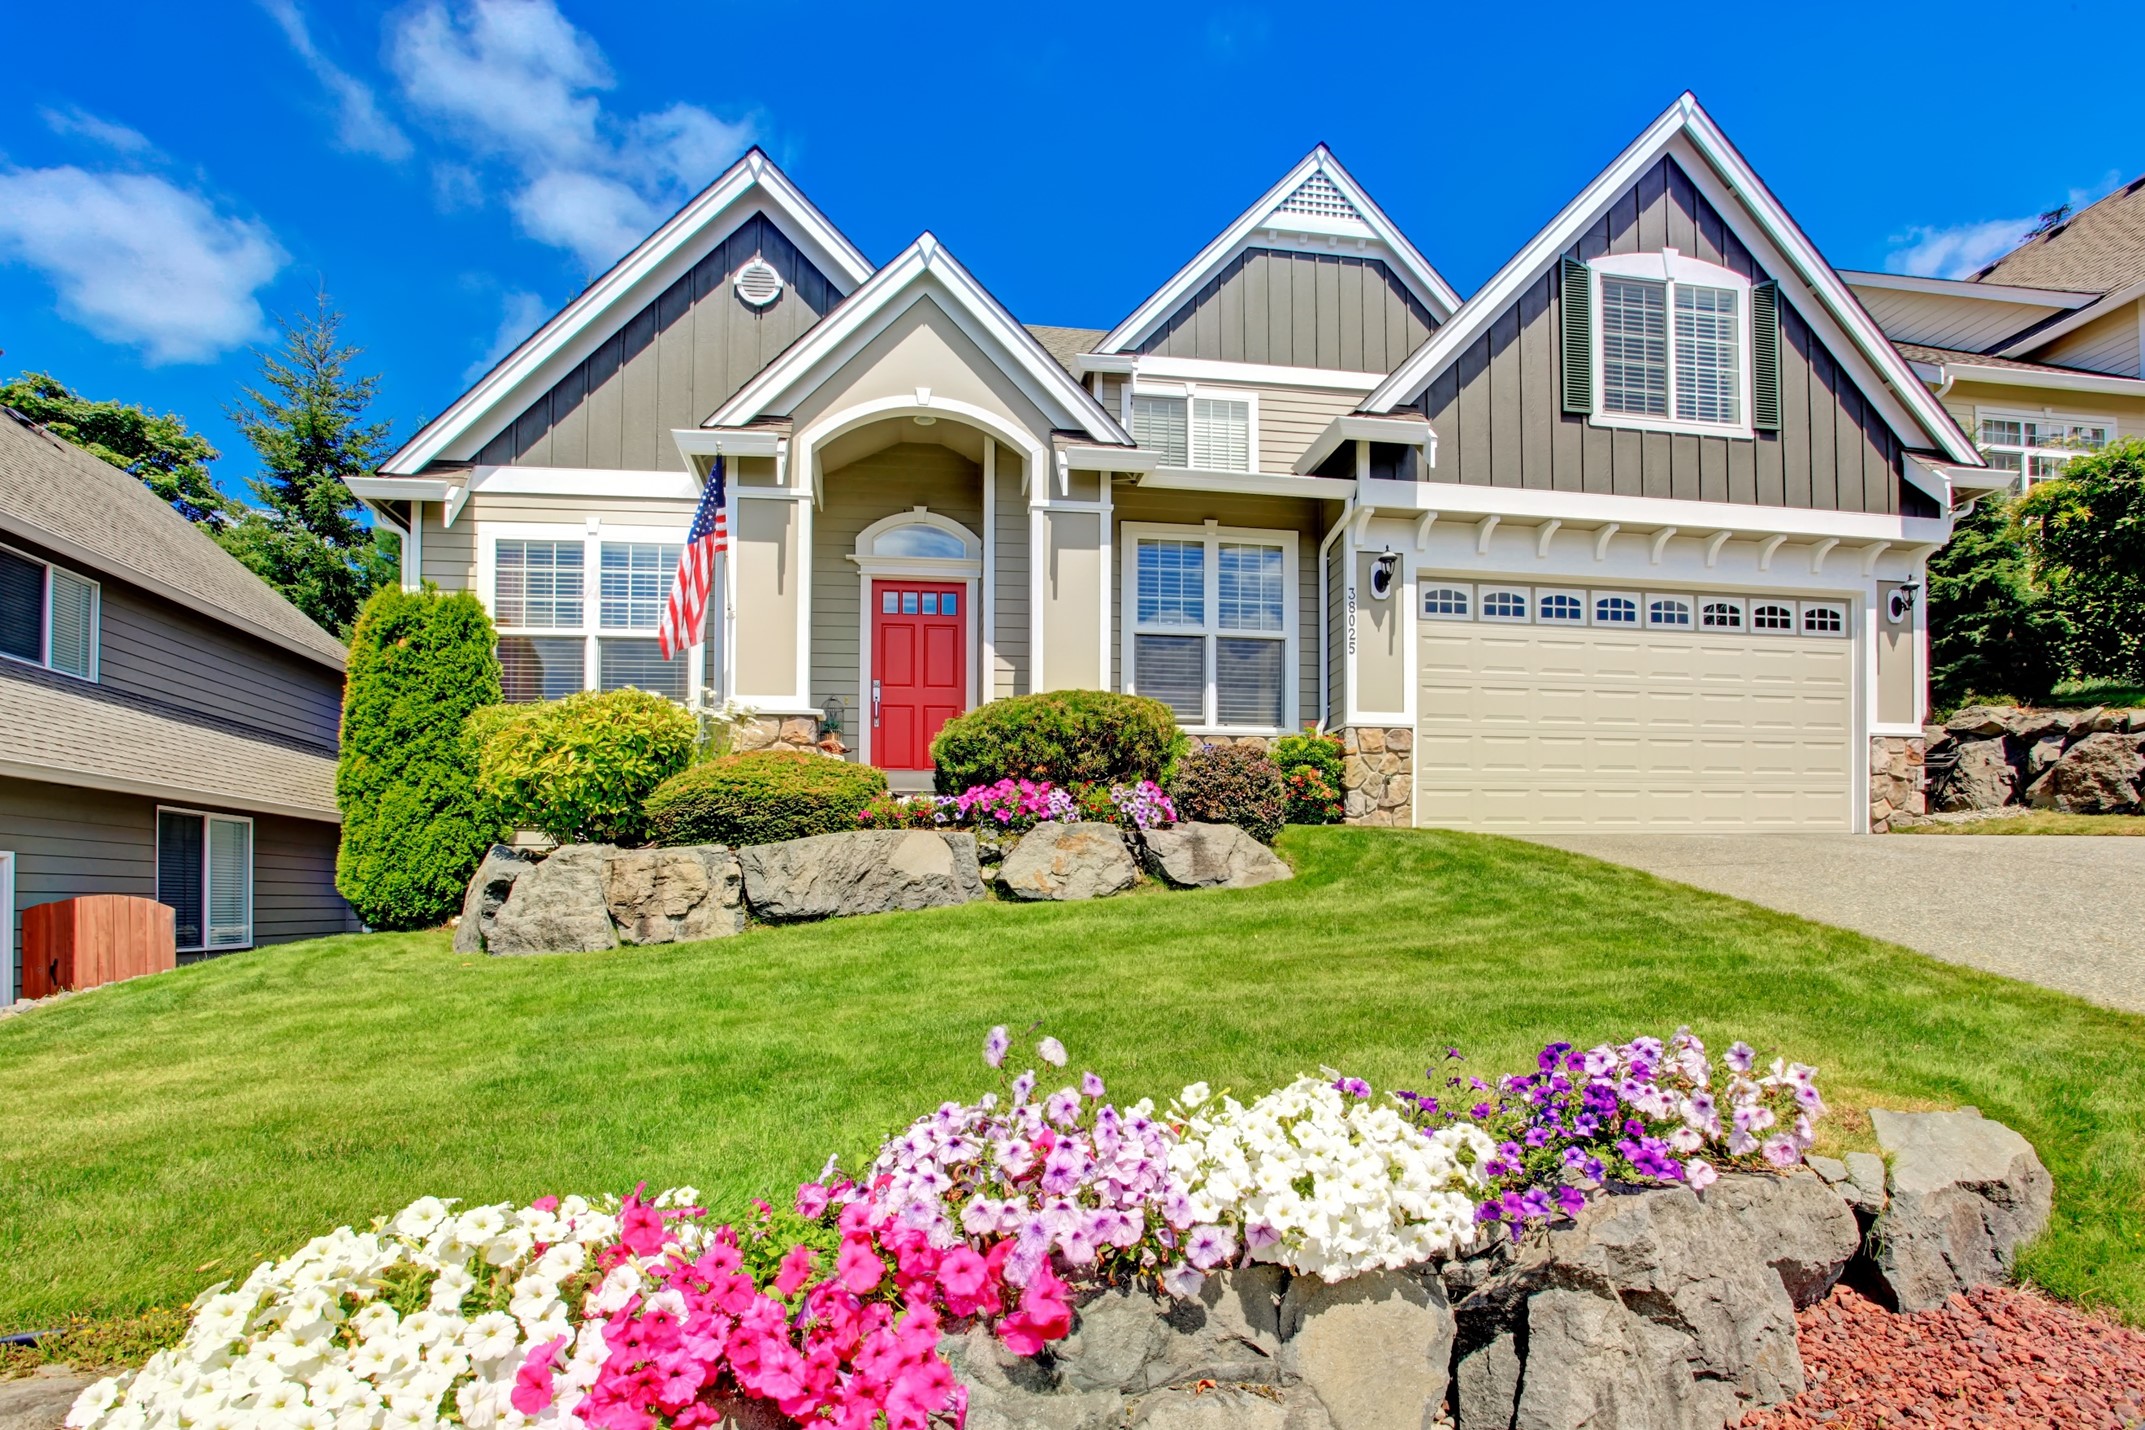 Front view of beautiful home with landscaping rocks and flowers